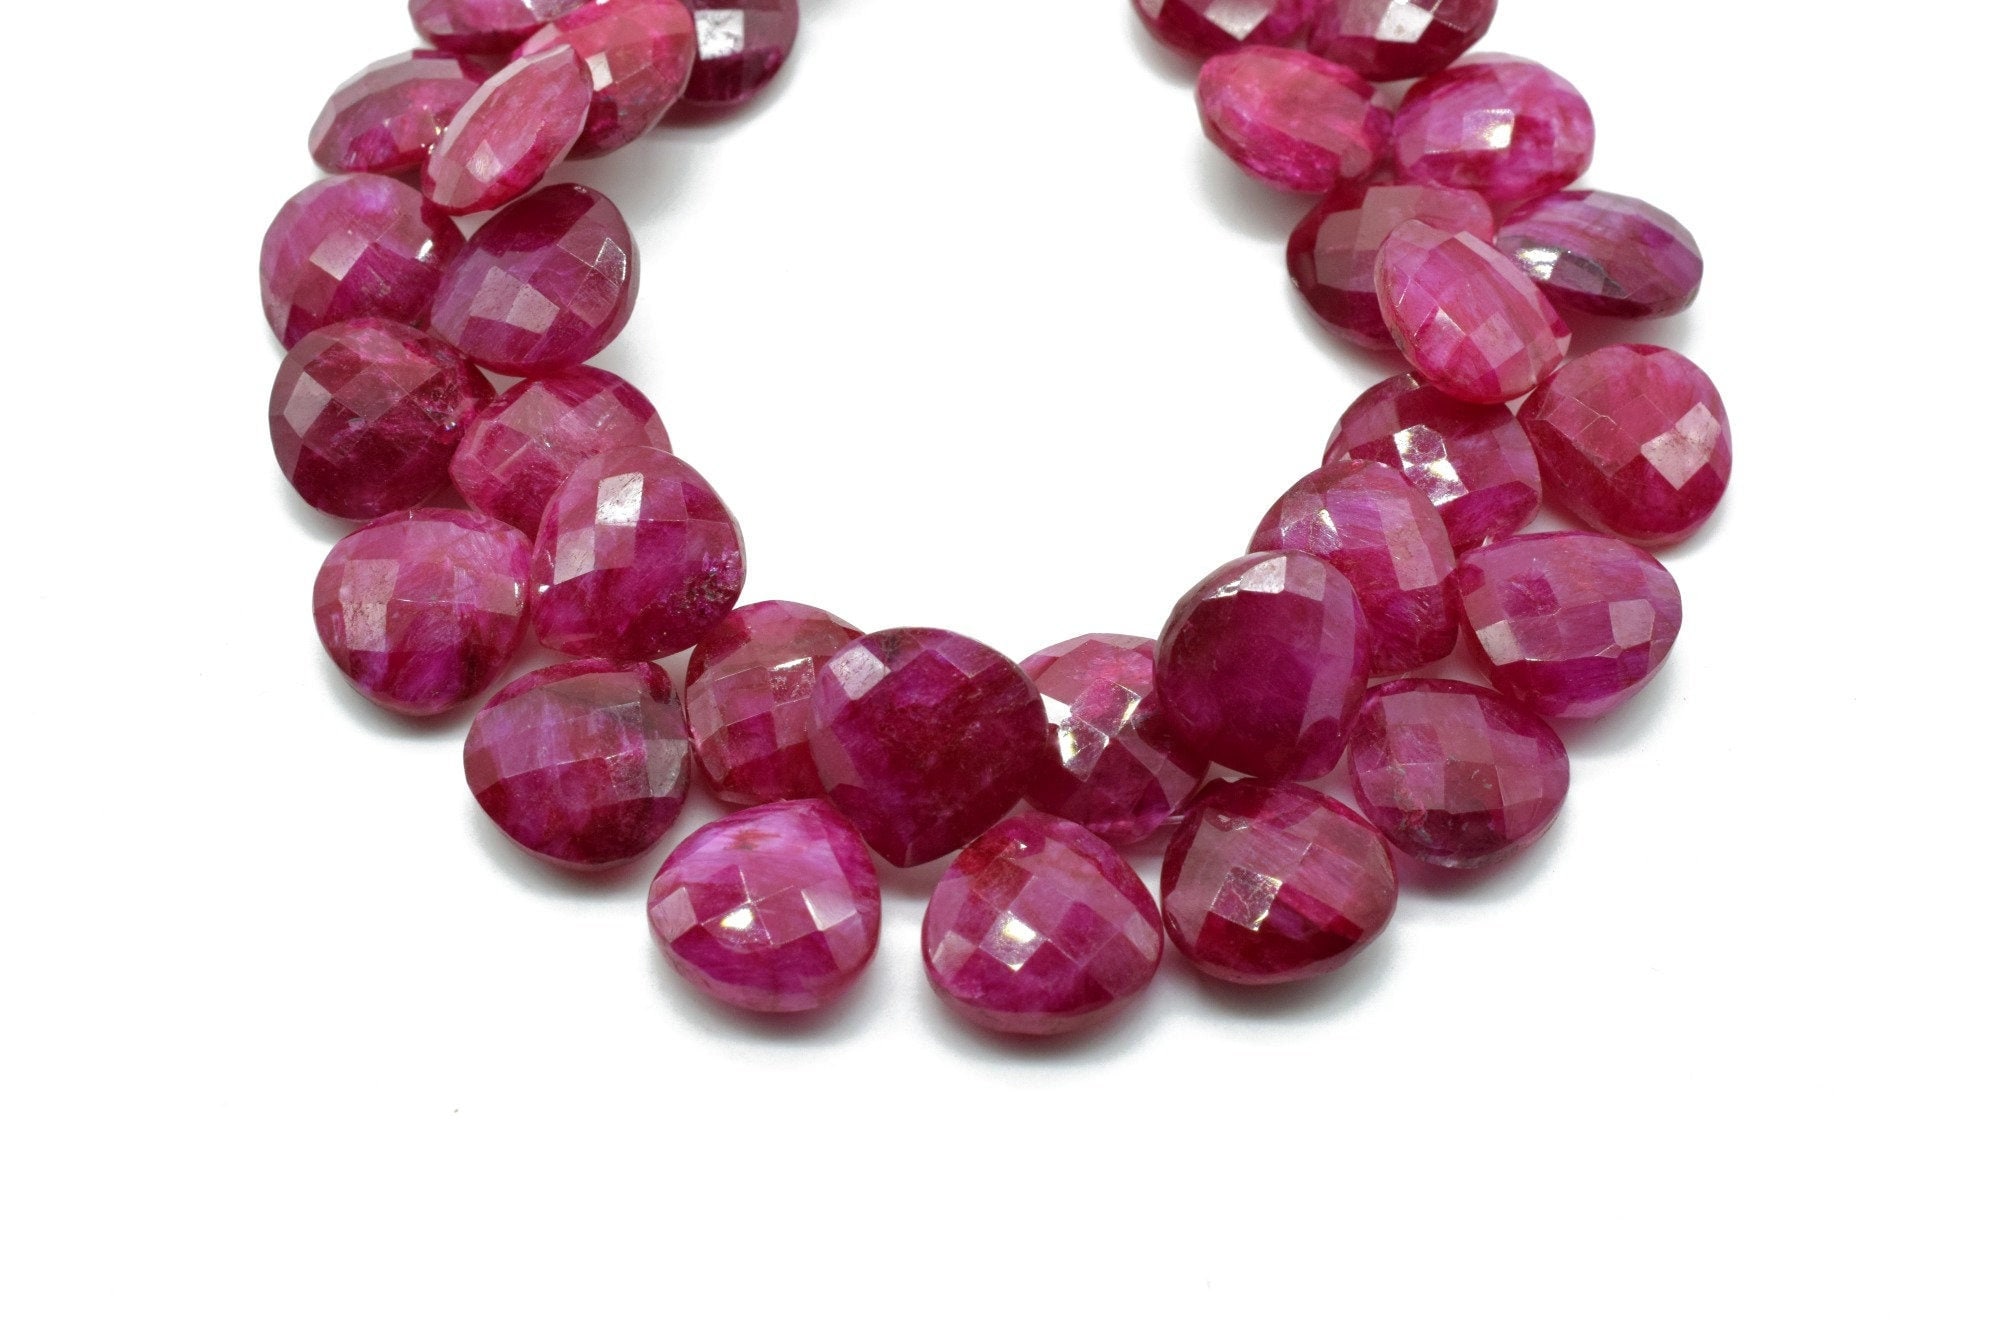 Natural Mozambique Garnet Faceted Heart Shape Briolettes,Size 7-8mm 123 Carats,9 Inches Strand,Super Finist